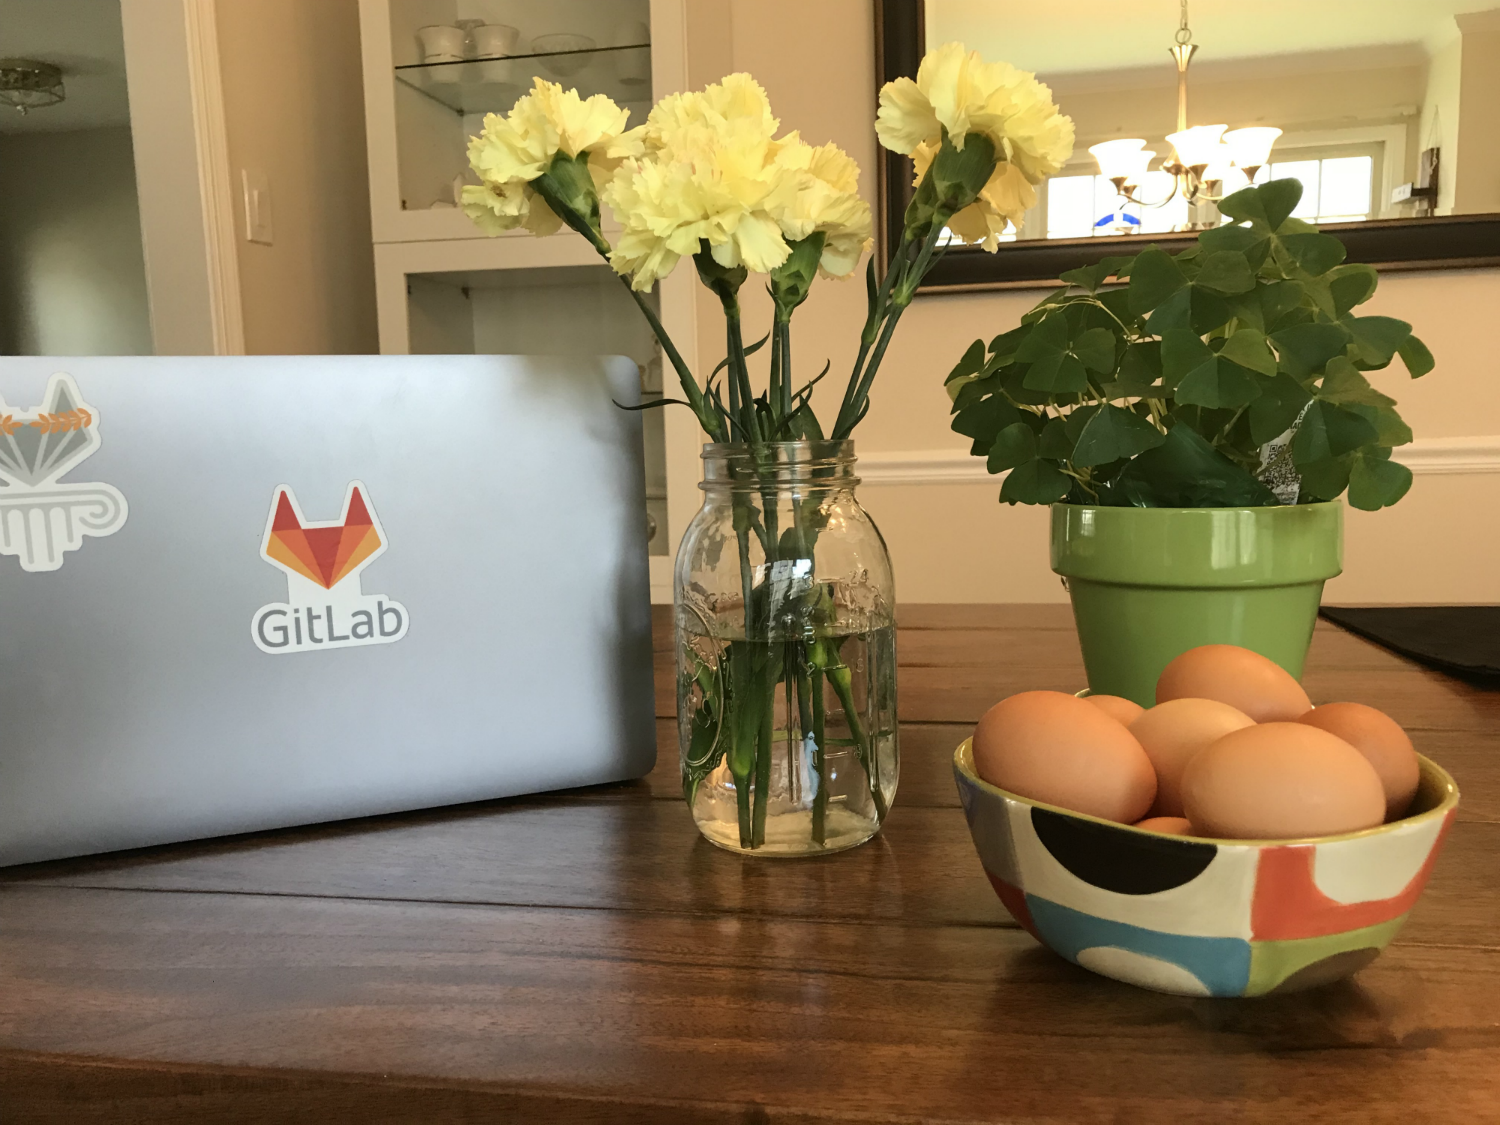 CI/CD All the things: Introducing Auto Breakfast from GitLab (sort of)